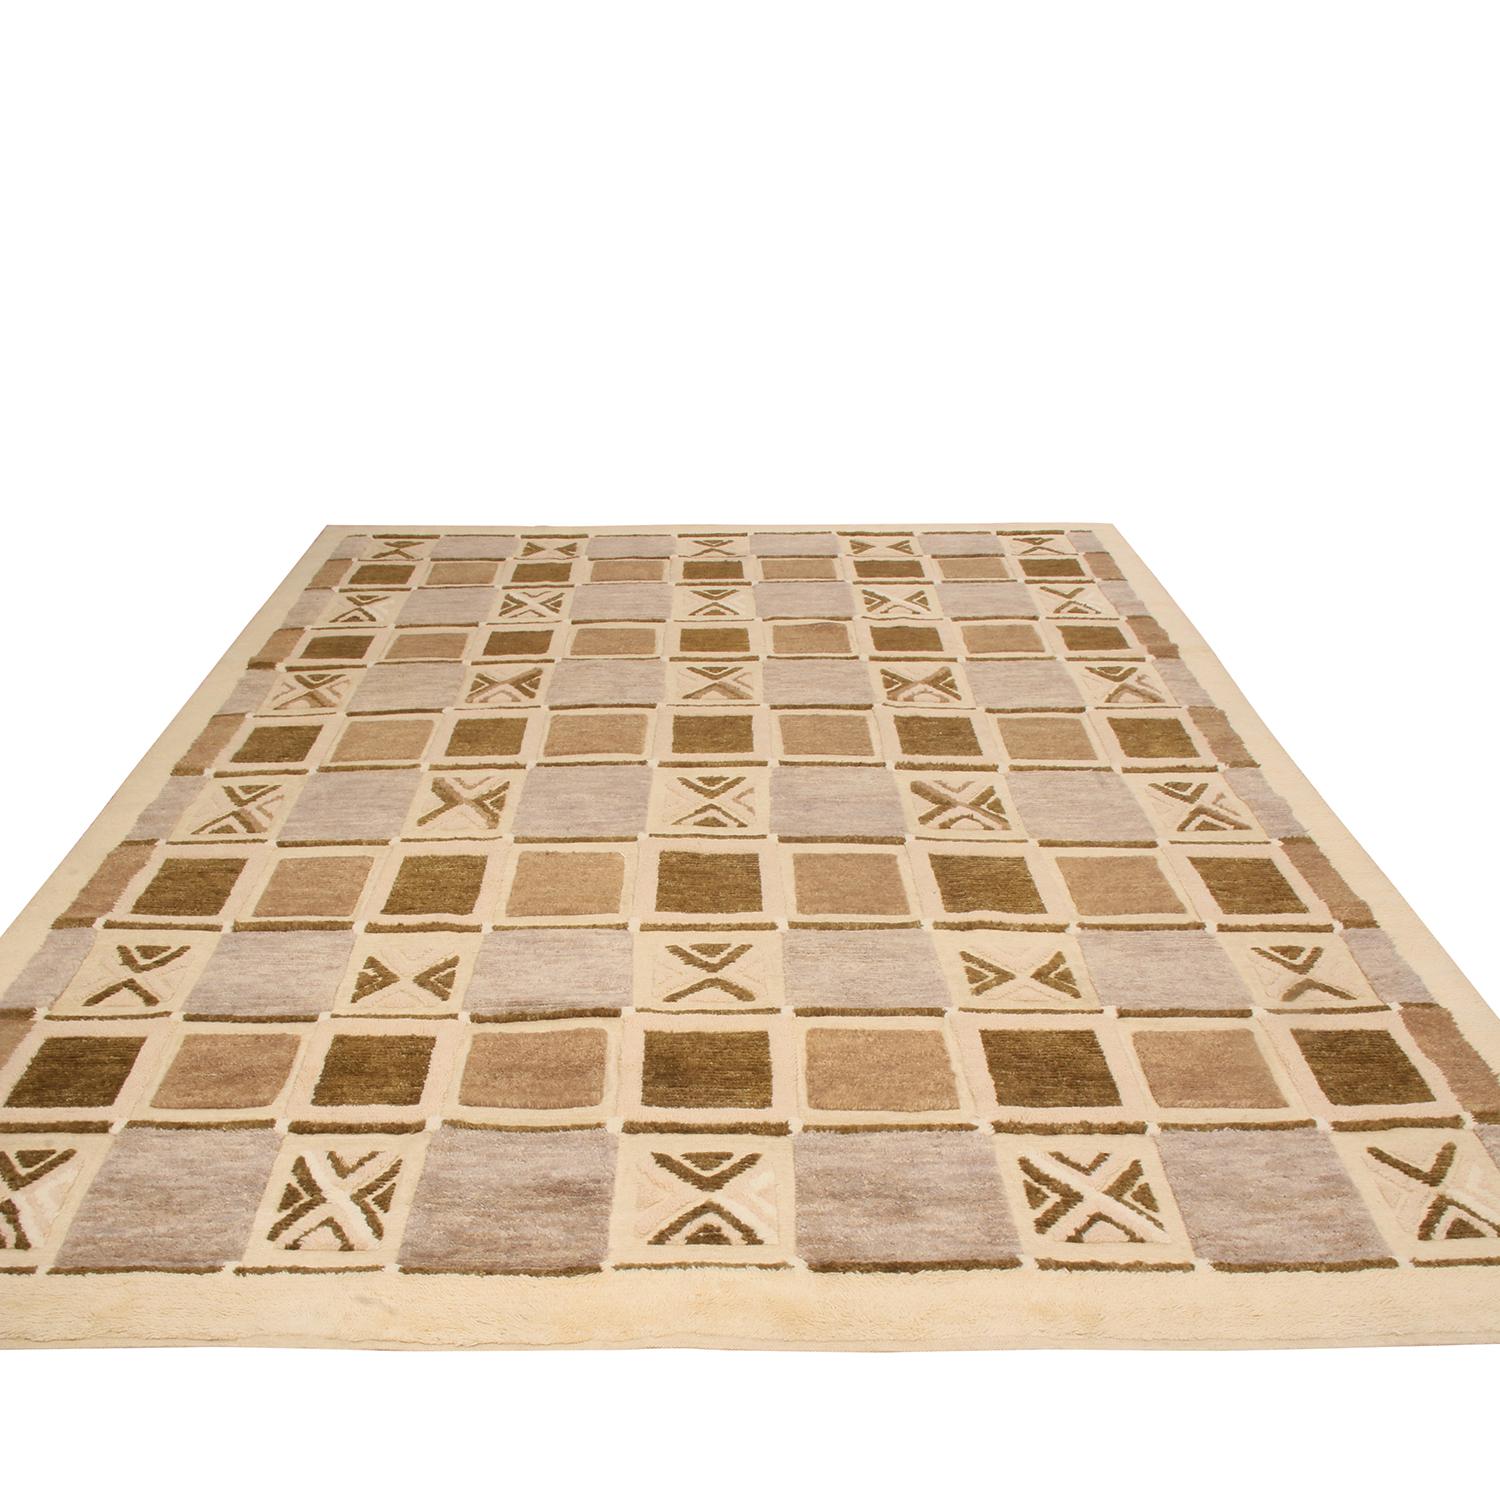 Originating from India, this Scandinavian-inspired rug from Rug & Kilim’s titular collection enjoys an exciting marriage of pile and flat-woven wool with an intricate geometric field design, boasting alternating mirrored rows of tribal patterns